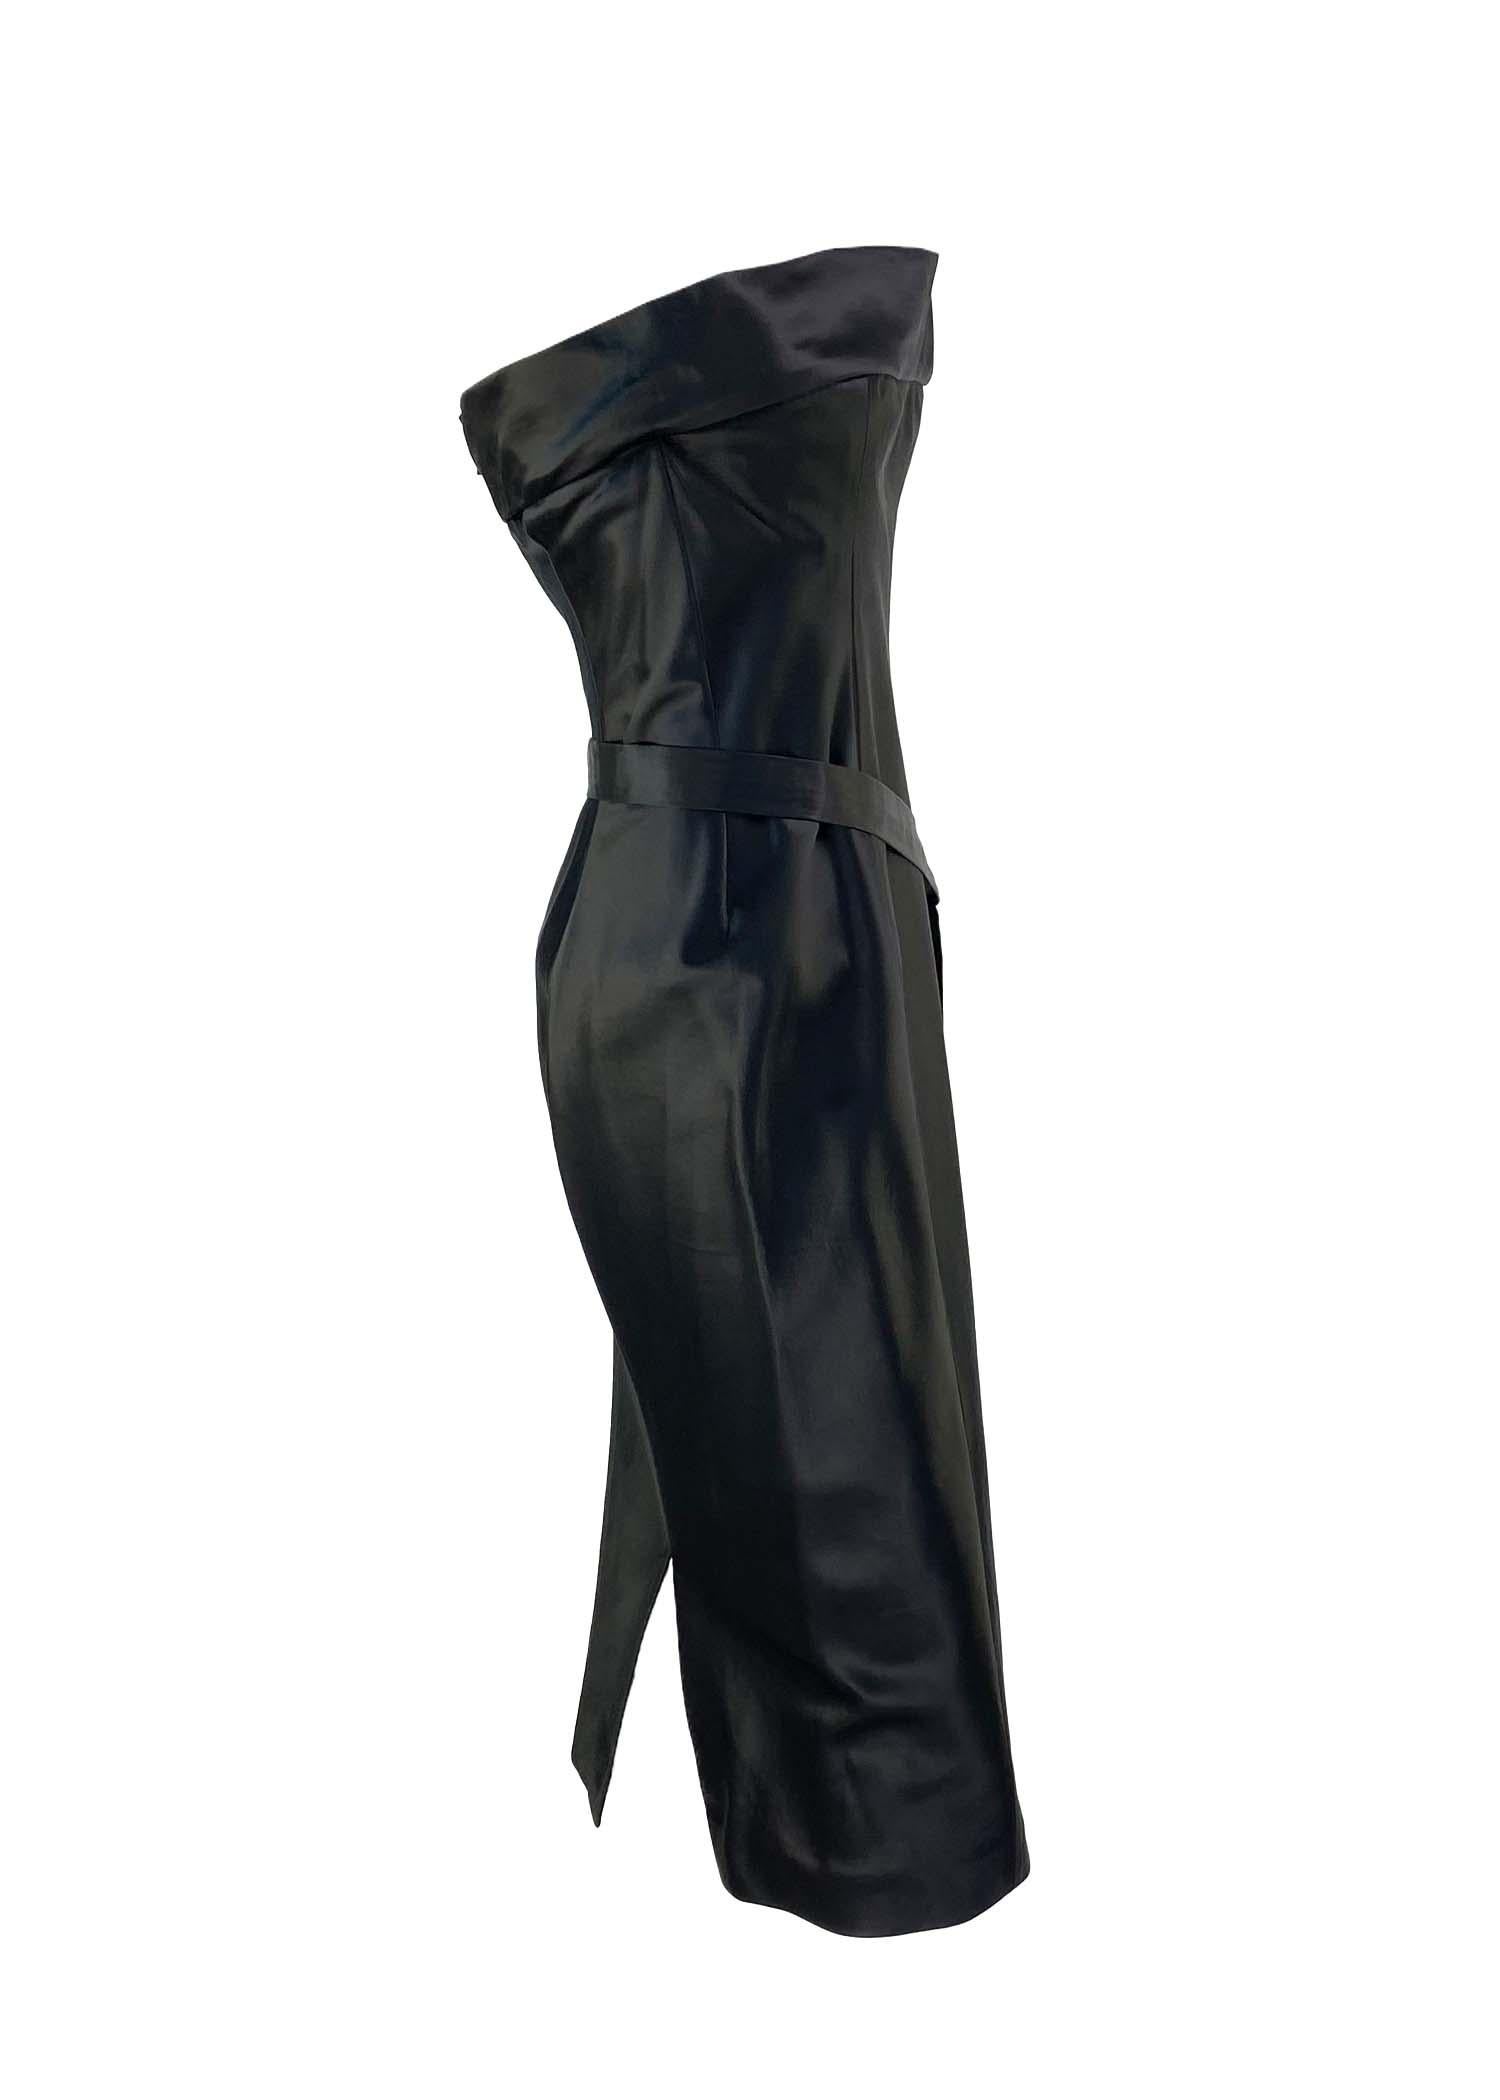 tom ford strapless leather dress